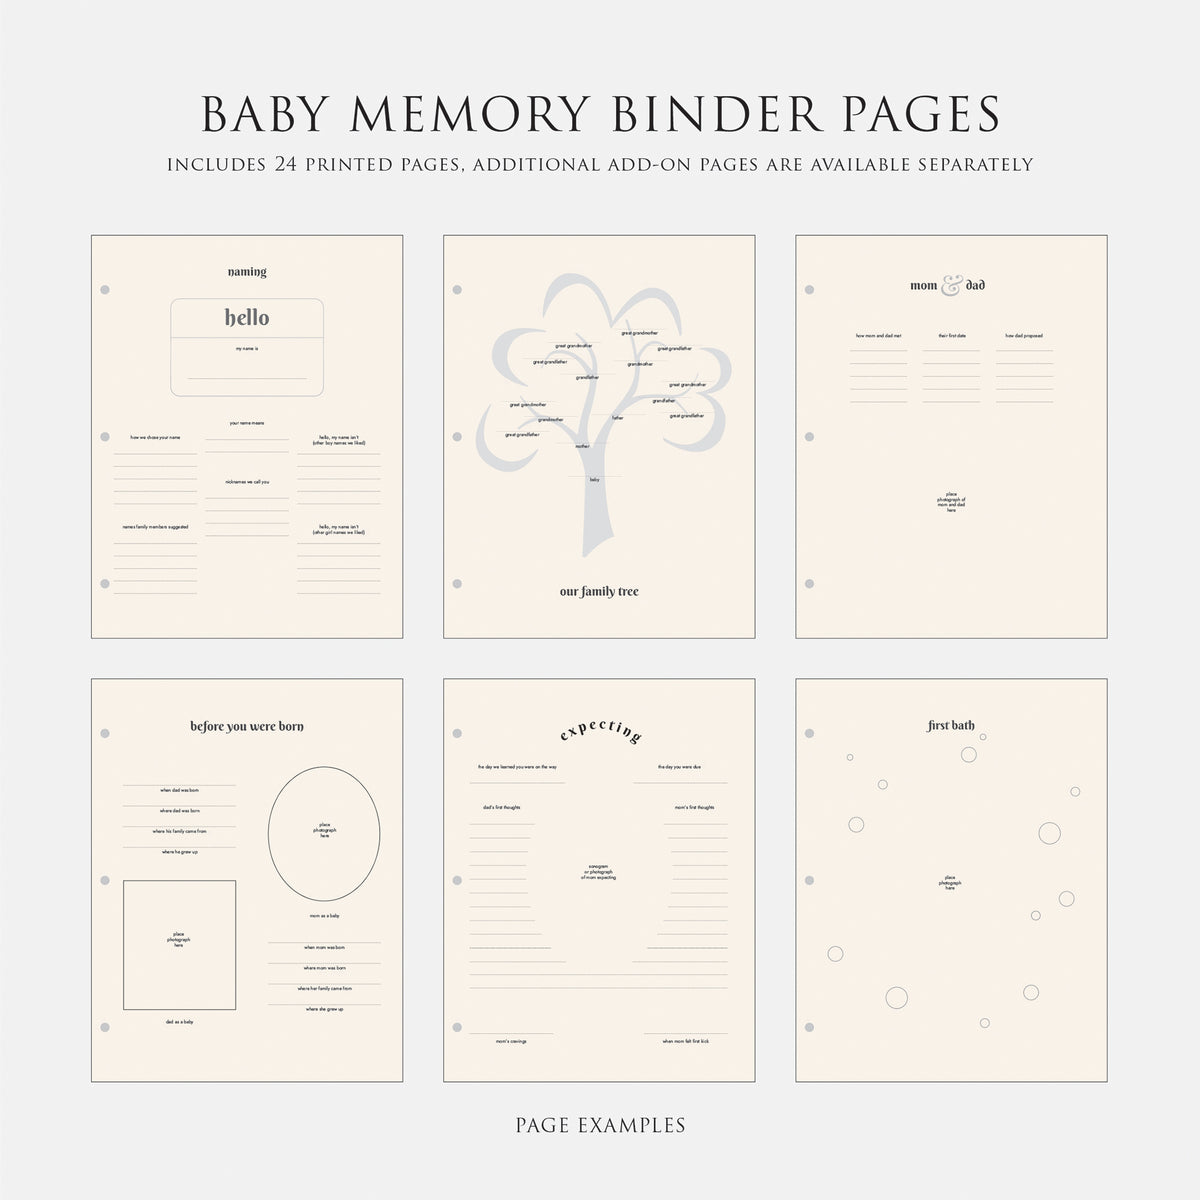 Personalized Baby Memory Binder with Celery Cotton Cover | Select Your Own Pages